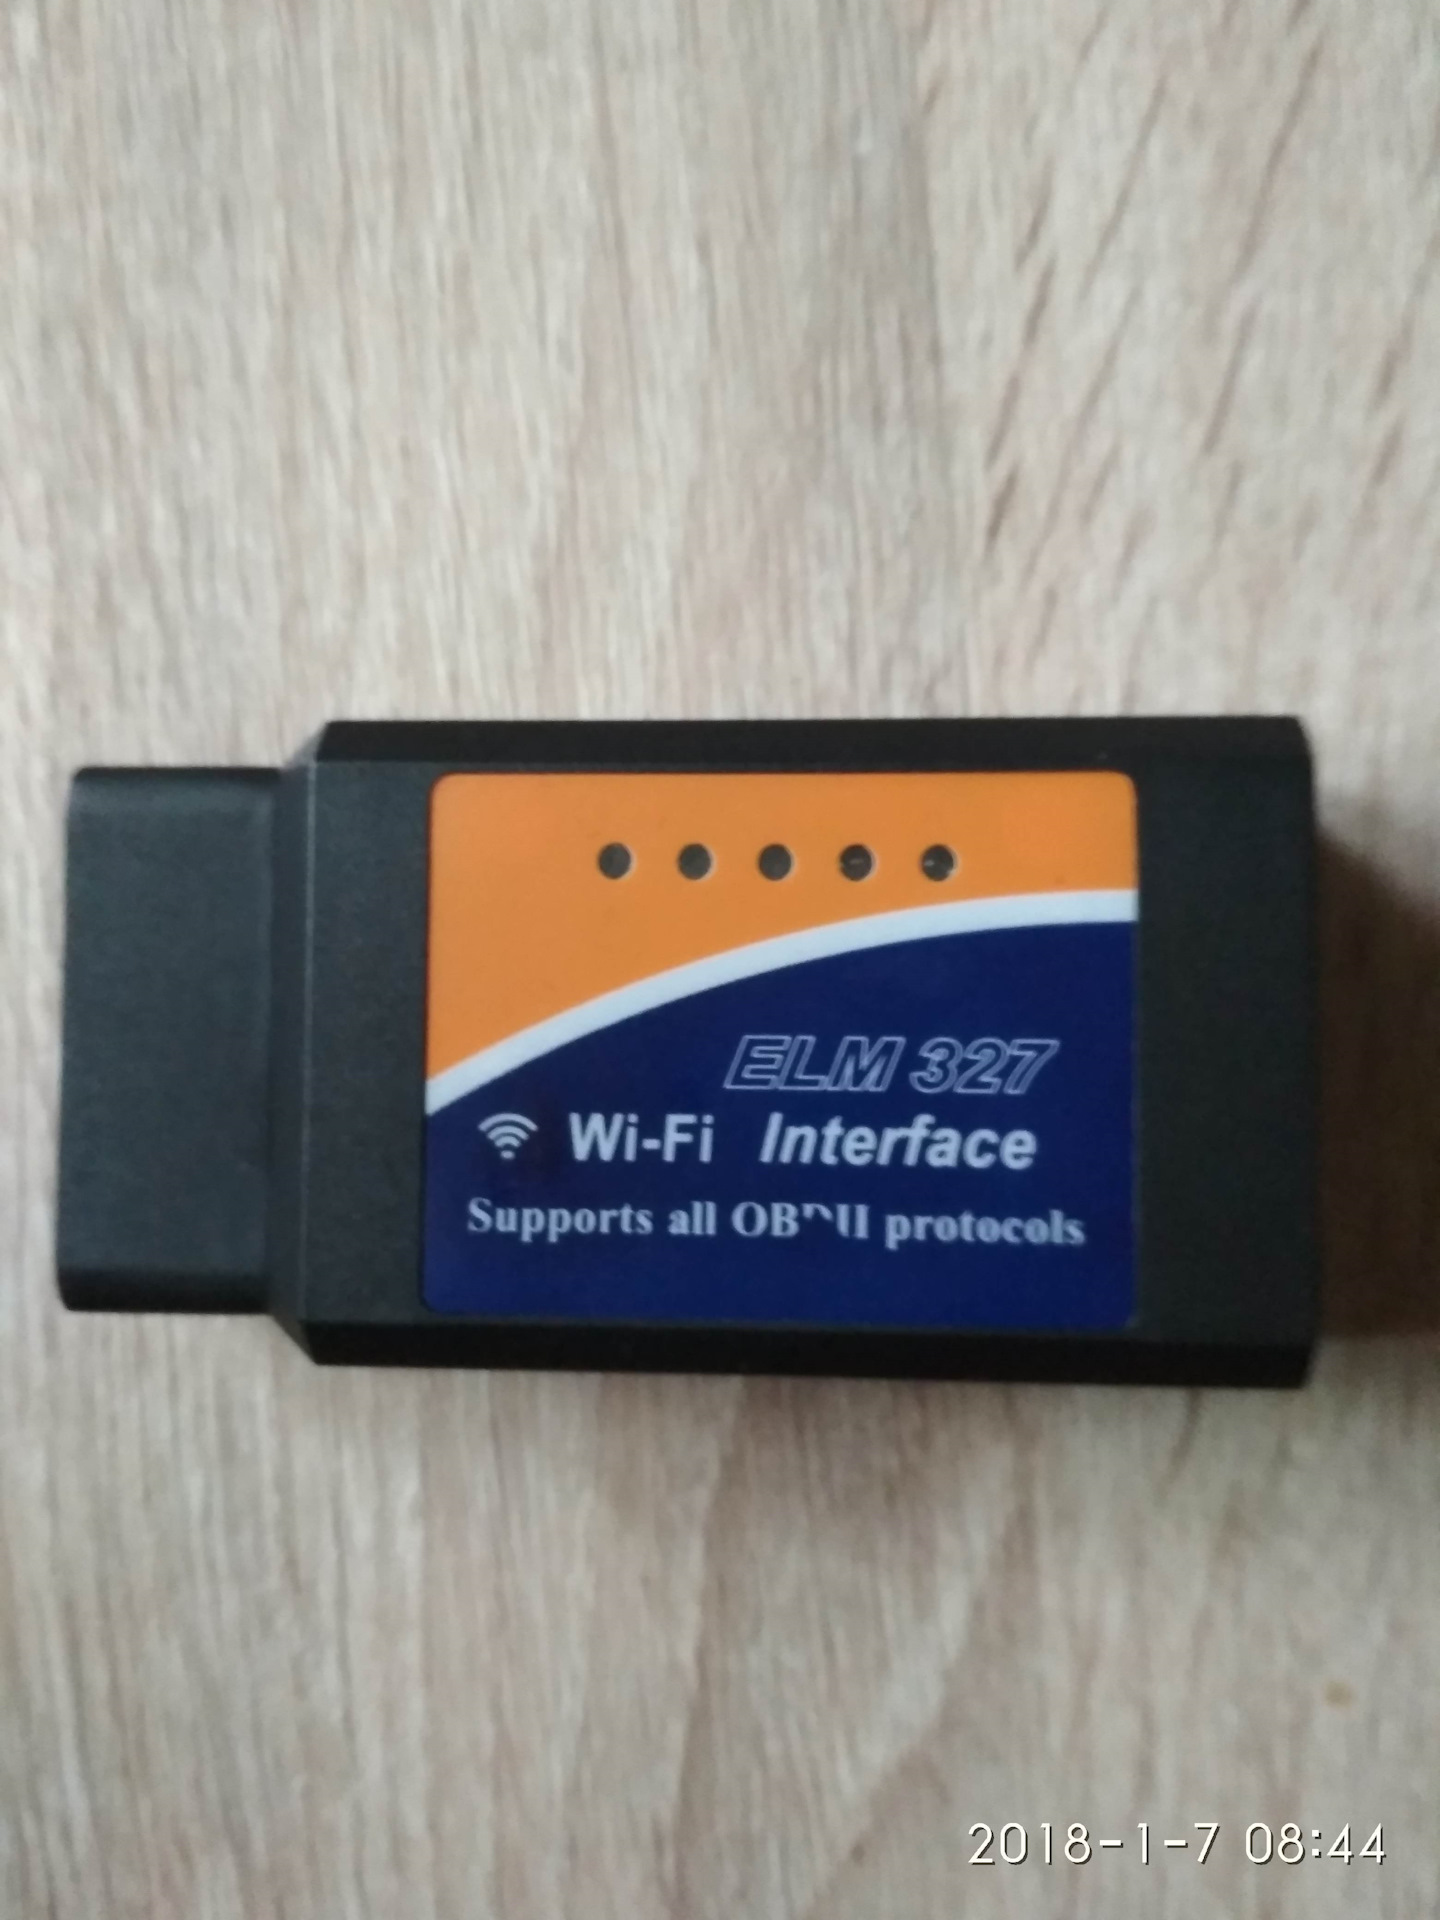 Interface supports all protocols. Elm327 pik18f25k80. Wi Fi модуль Elm 327. Elm327 interface supports all obd2 Protocols. Obd2 сканер interface supports.